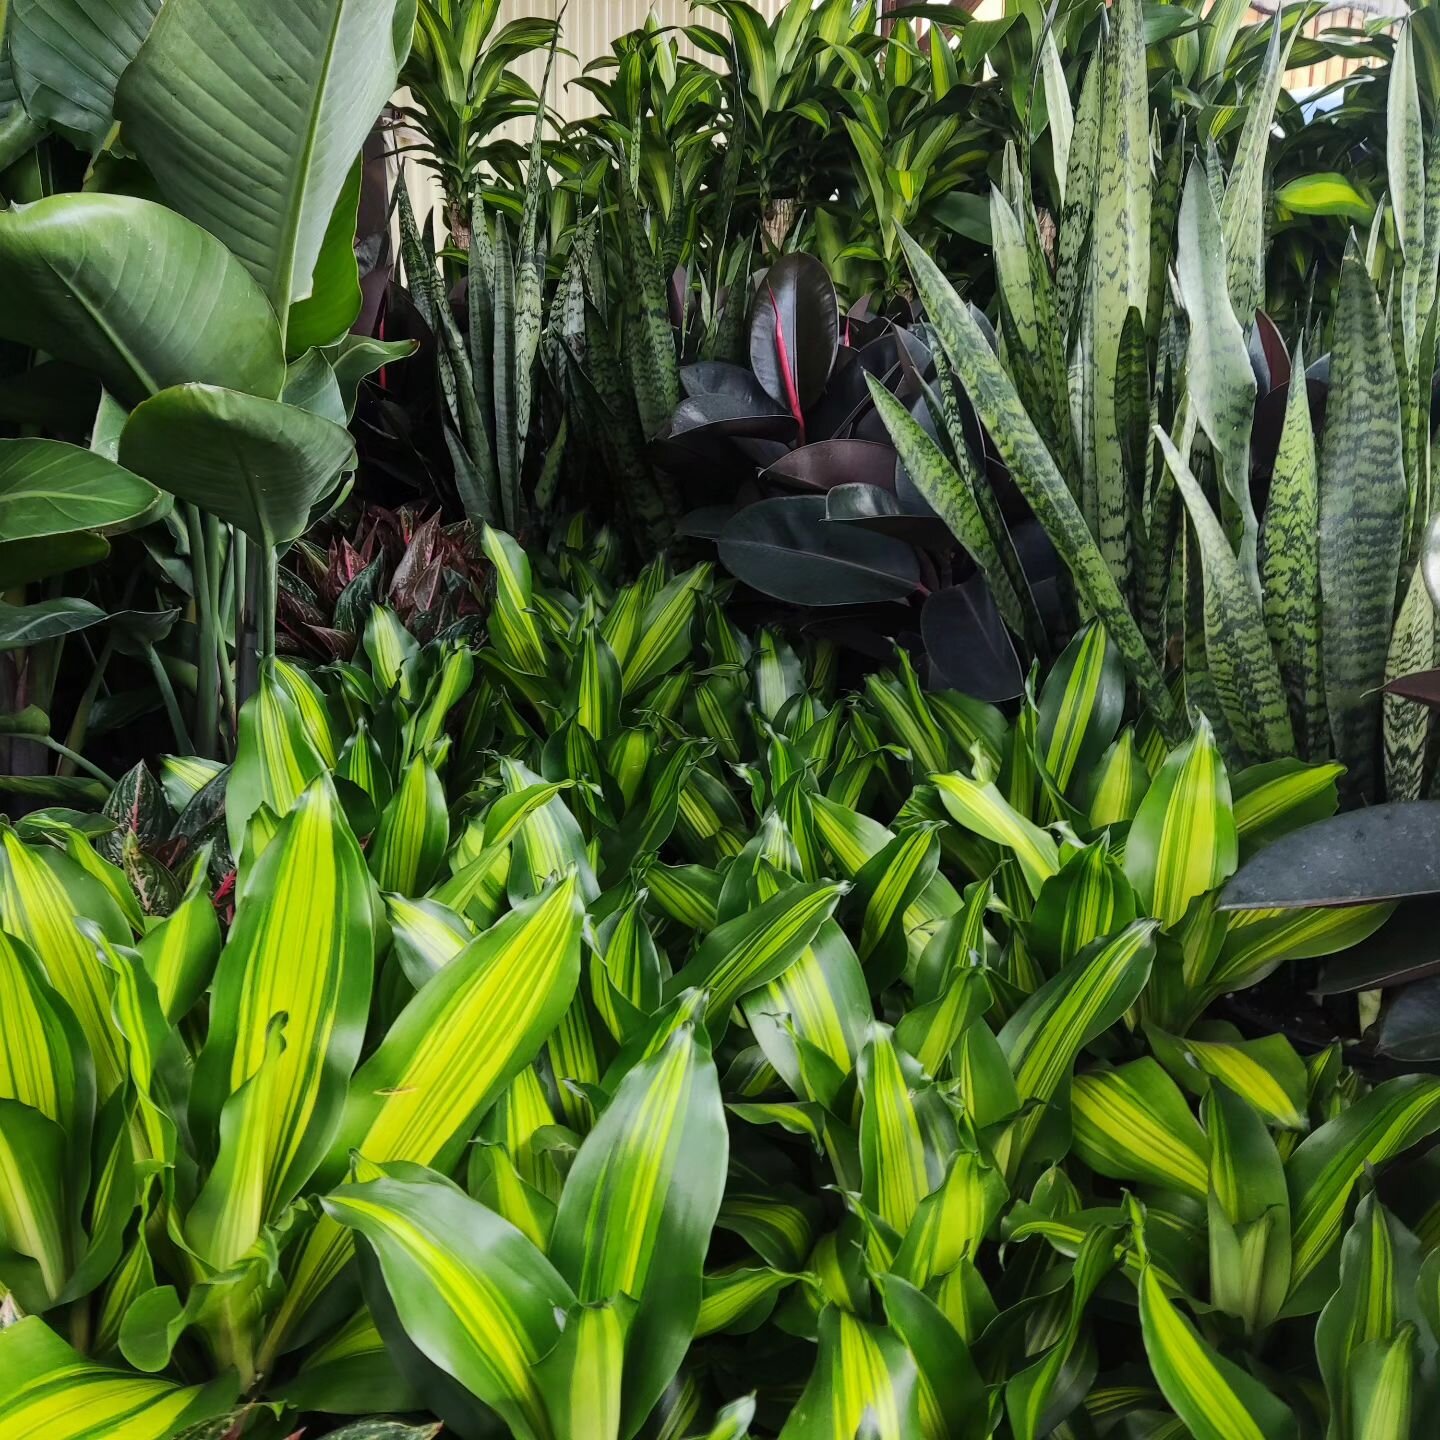 It's that time of year!! Our northern beaches nursery is full of fresh stock from our growers and ready to brighten offices Sydney wide 👌
.
.
.
.
.
#indoorpots #indoorplantpots #indooroutdoorpots #indoorpotsonline #indoorpotsandplanters #sydney #pla